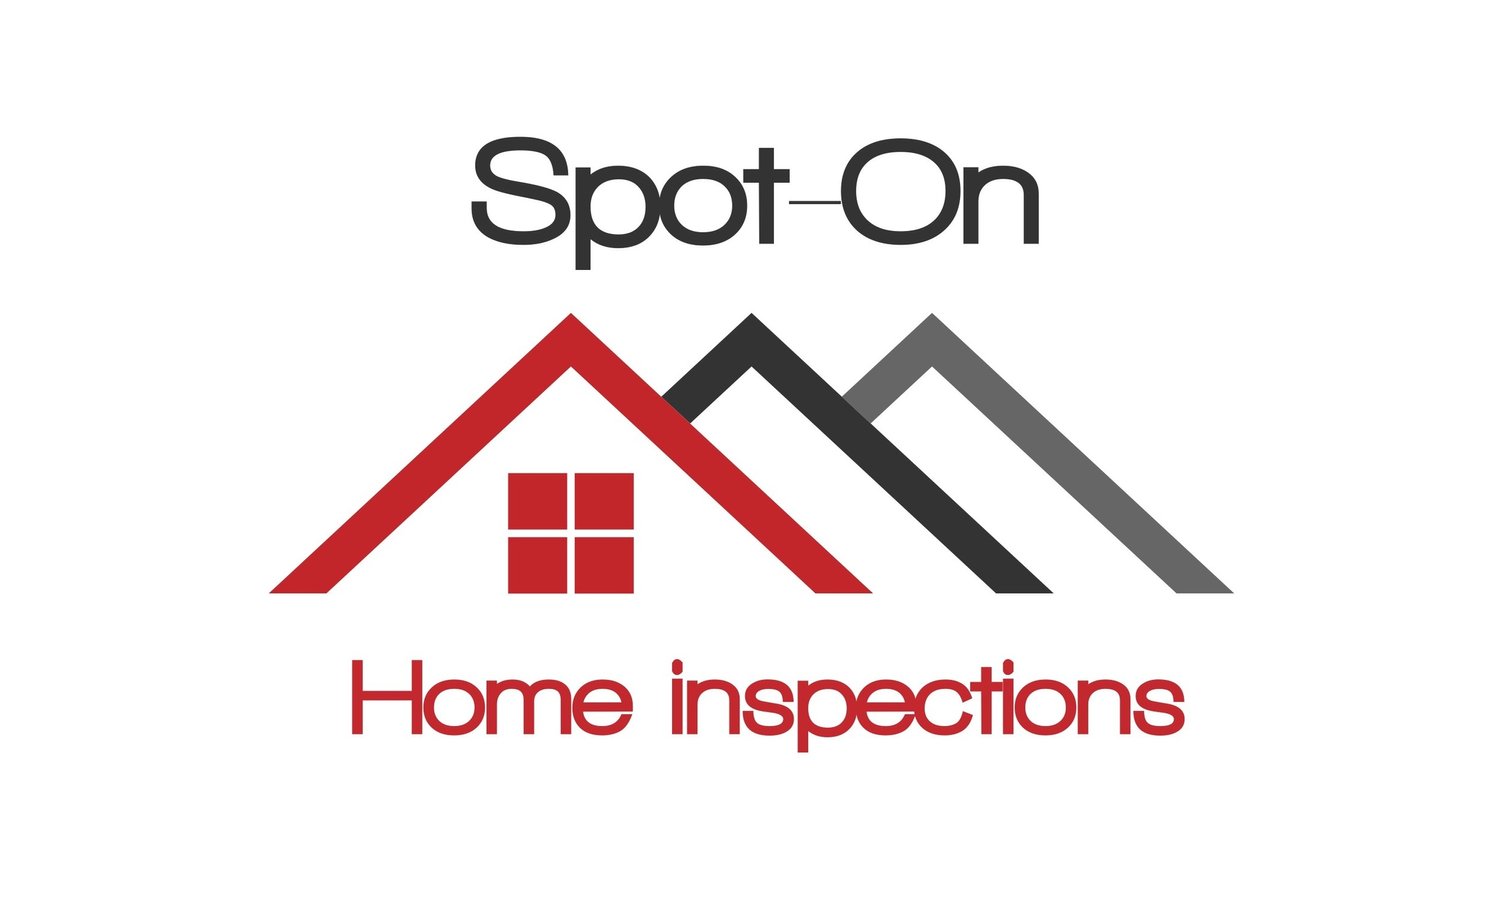 SPOT-ON HOME INSPECTIONS